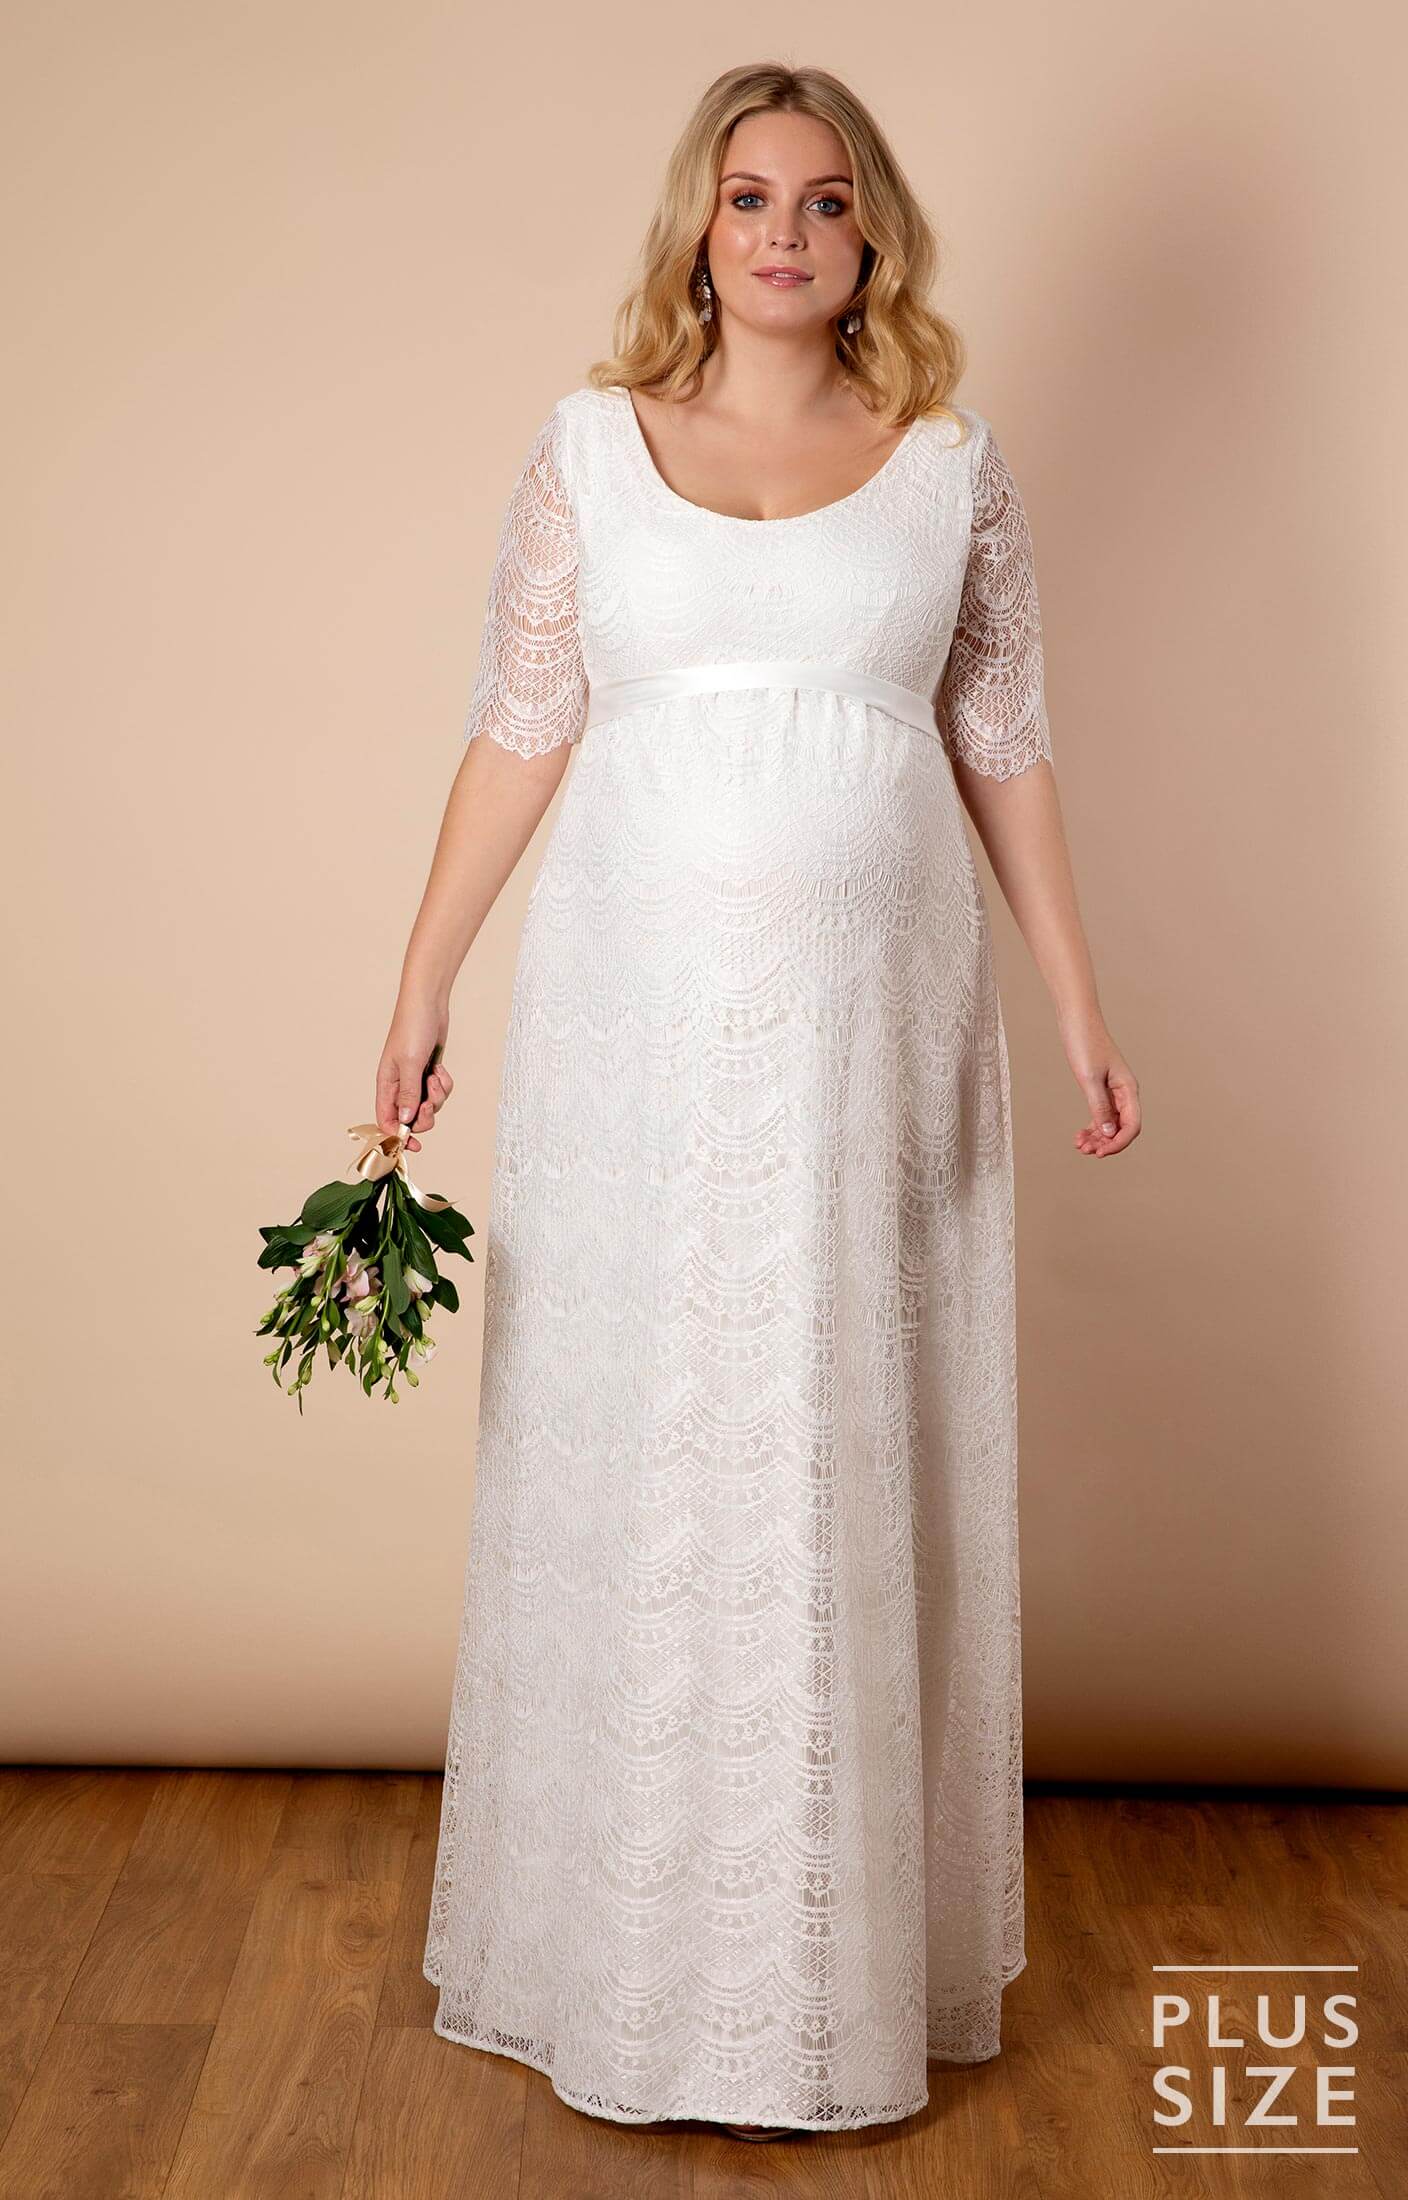 Size Maternity Wedding Gown Ivory White ...